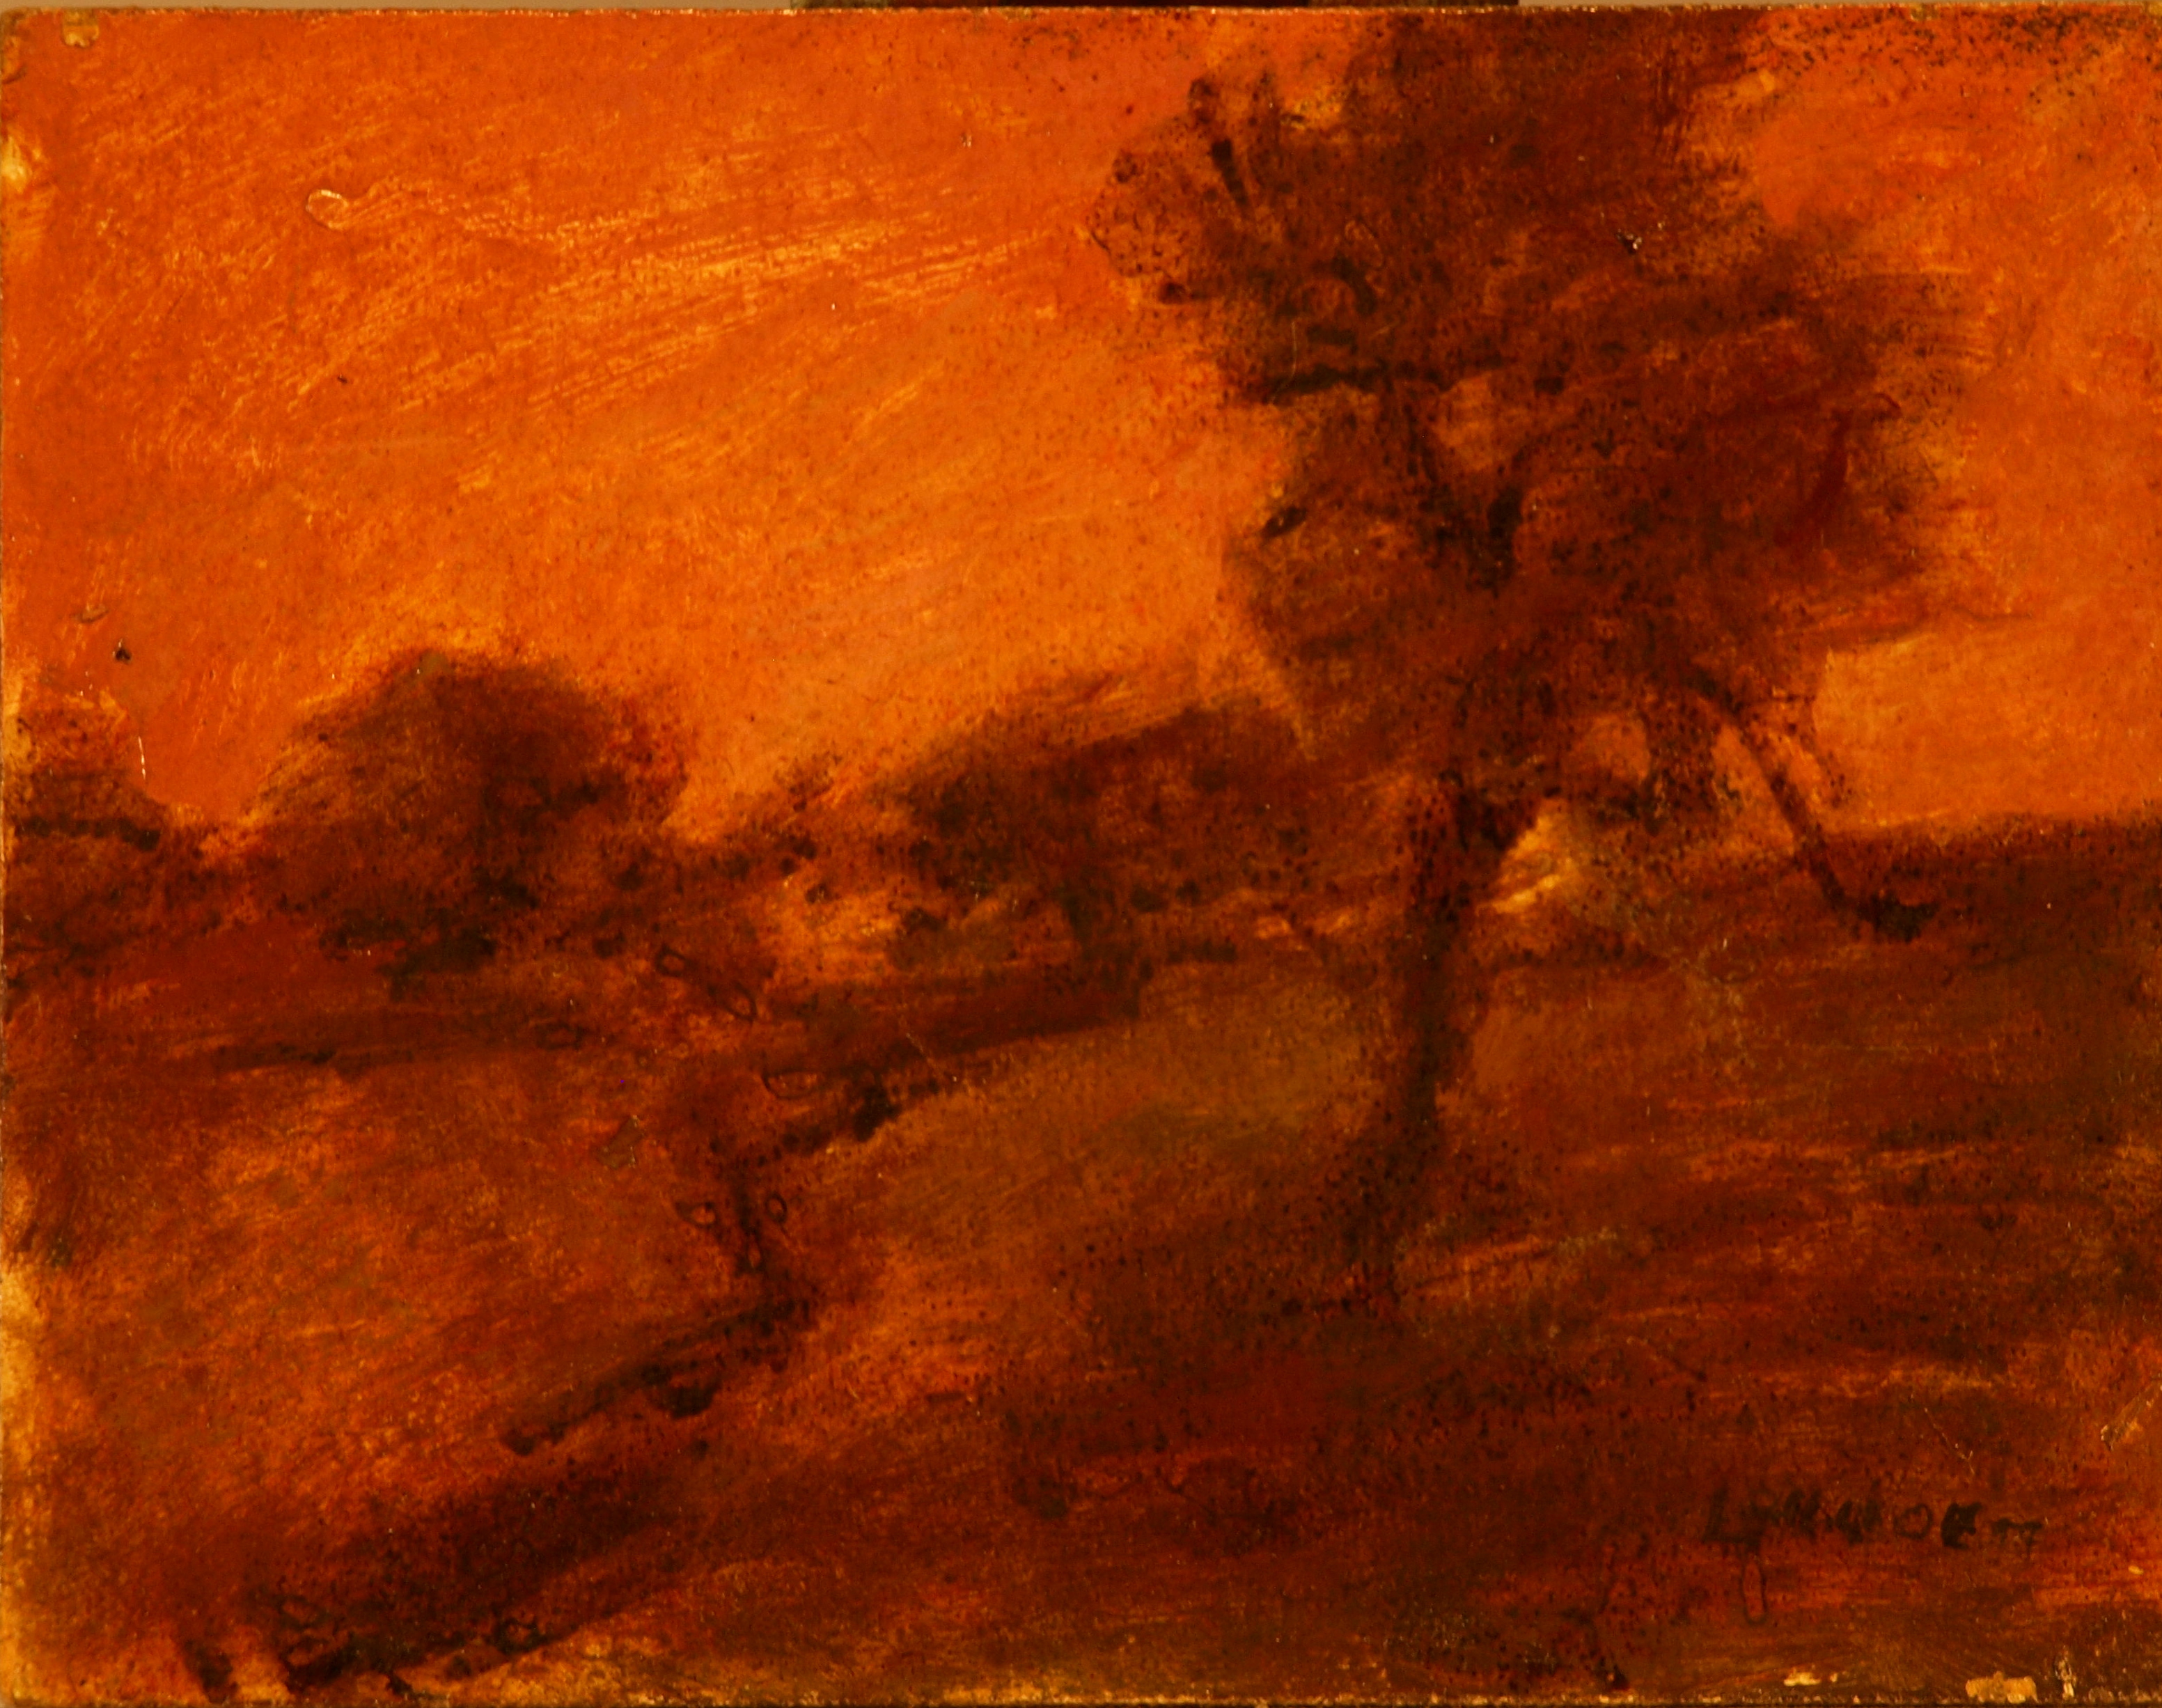 Glowing Atmosphere, Oil on Panel, 6 x 8 Inches, by Bernard Lennon, $125